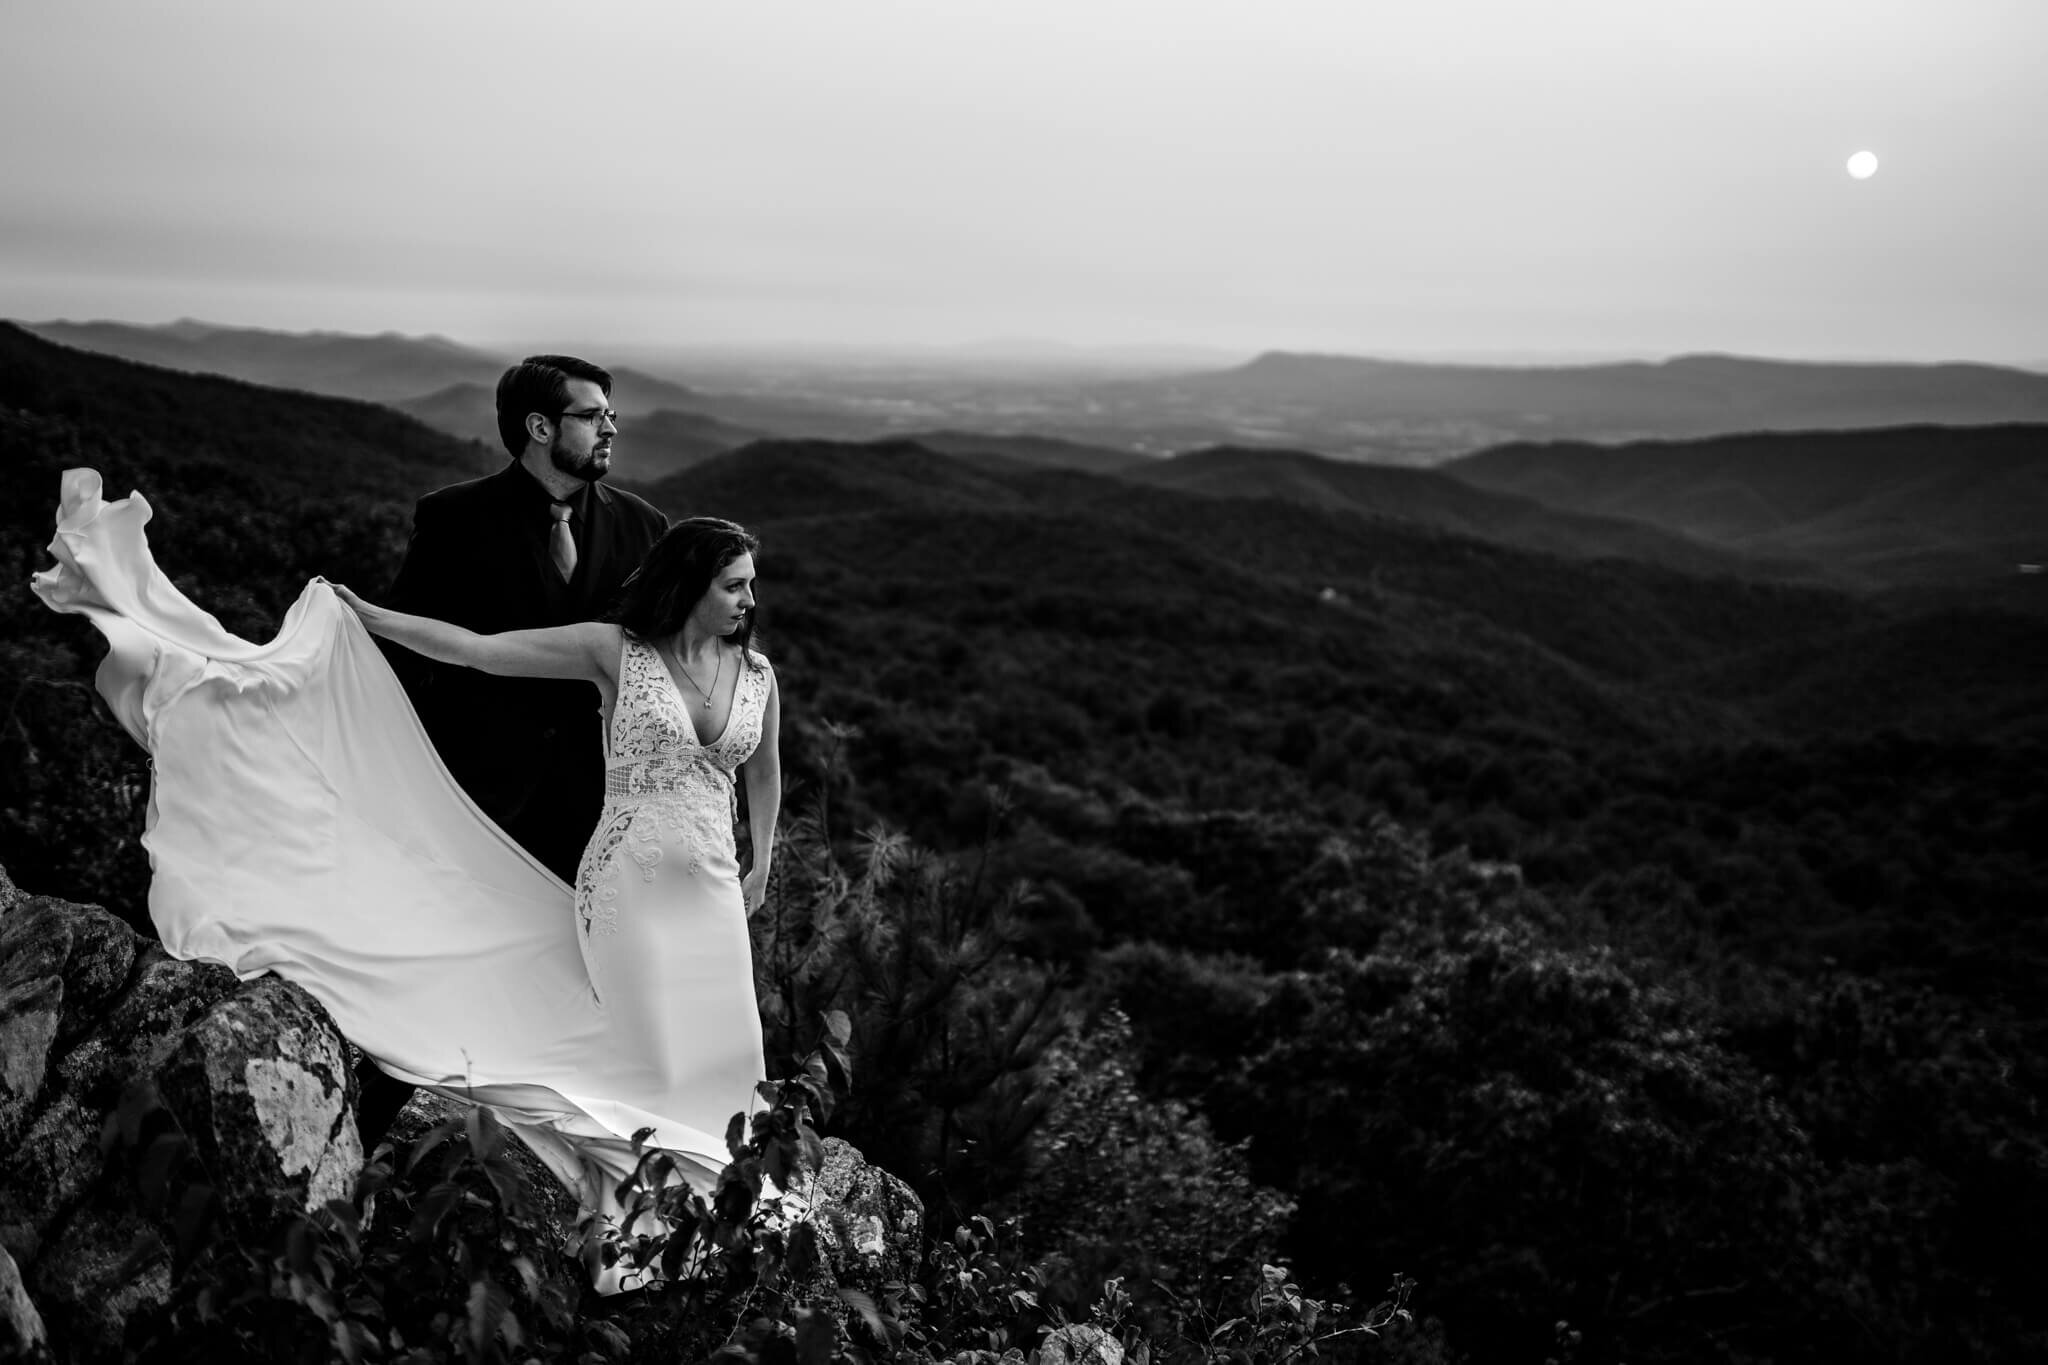 Dark-Hollow-Falls-Point-Overlook-Shenandoah-Adventure-Wedding-Portrait-Session-Photography-by-Bee-Two-Sweet-128.jpg